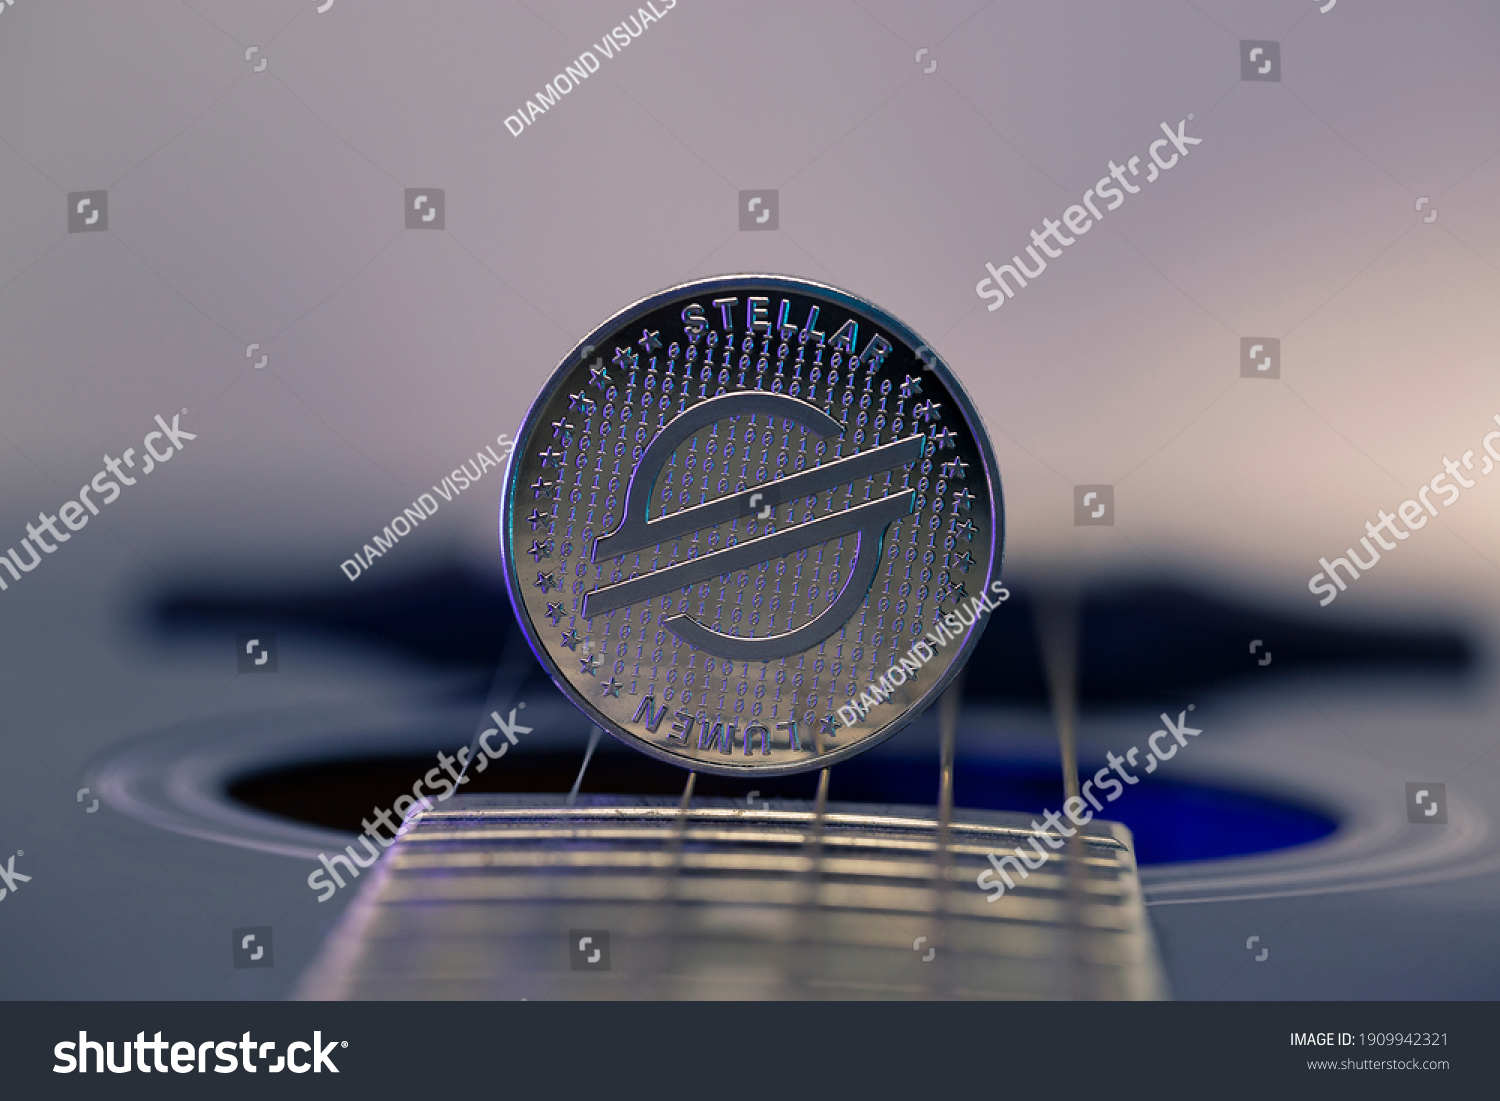 Stellar Lumens XLM cryptocurrency physical coin placed on guitar strings and lit with blue light. Macro shot. #1909942321